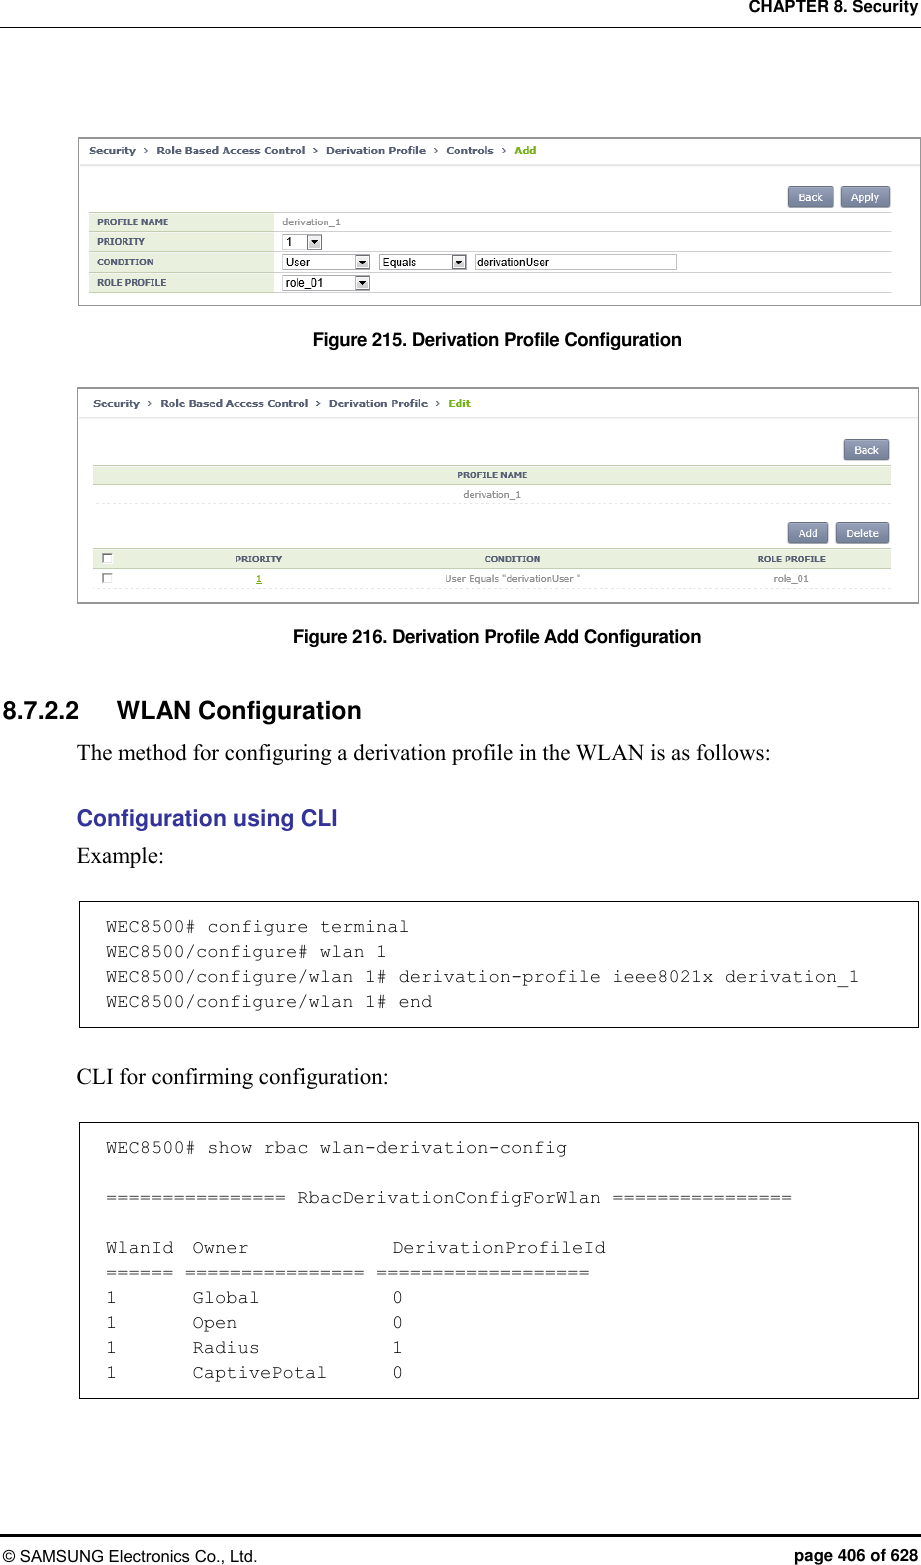 CHAPTER 8. Security © SAMSUNG Electronics Co., Ltd.  page 406 of 628  Figure 215. Derivation Profile Configuration    Figure 216. Derivation Profile Add Configuration  8.7.2.2  WLAN Configuration The method for configuring a derivation profile in the WLAN is as follows:  Configuration using CLI Example:  WEC8500# configure terminal WEC8500/configure# wlan 1 WEC8500/configure/wlan 1# derivation-profile ieee8021x derivation_1 WEC8500/configure/wlan 1# end  CLI for confirming configuration:  WEC8500# show rbac wlan-derivation-config  ================ RbacDerivationConfigForWlan ================  WlanId  Owner              DerivationProfileId ====== ================ =================== 1        Global             0 1        Open               0 1        Radius             1 1        CaptivePotal       0 